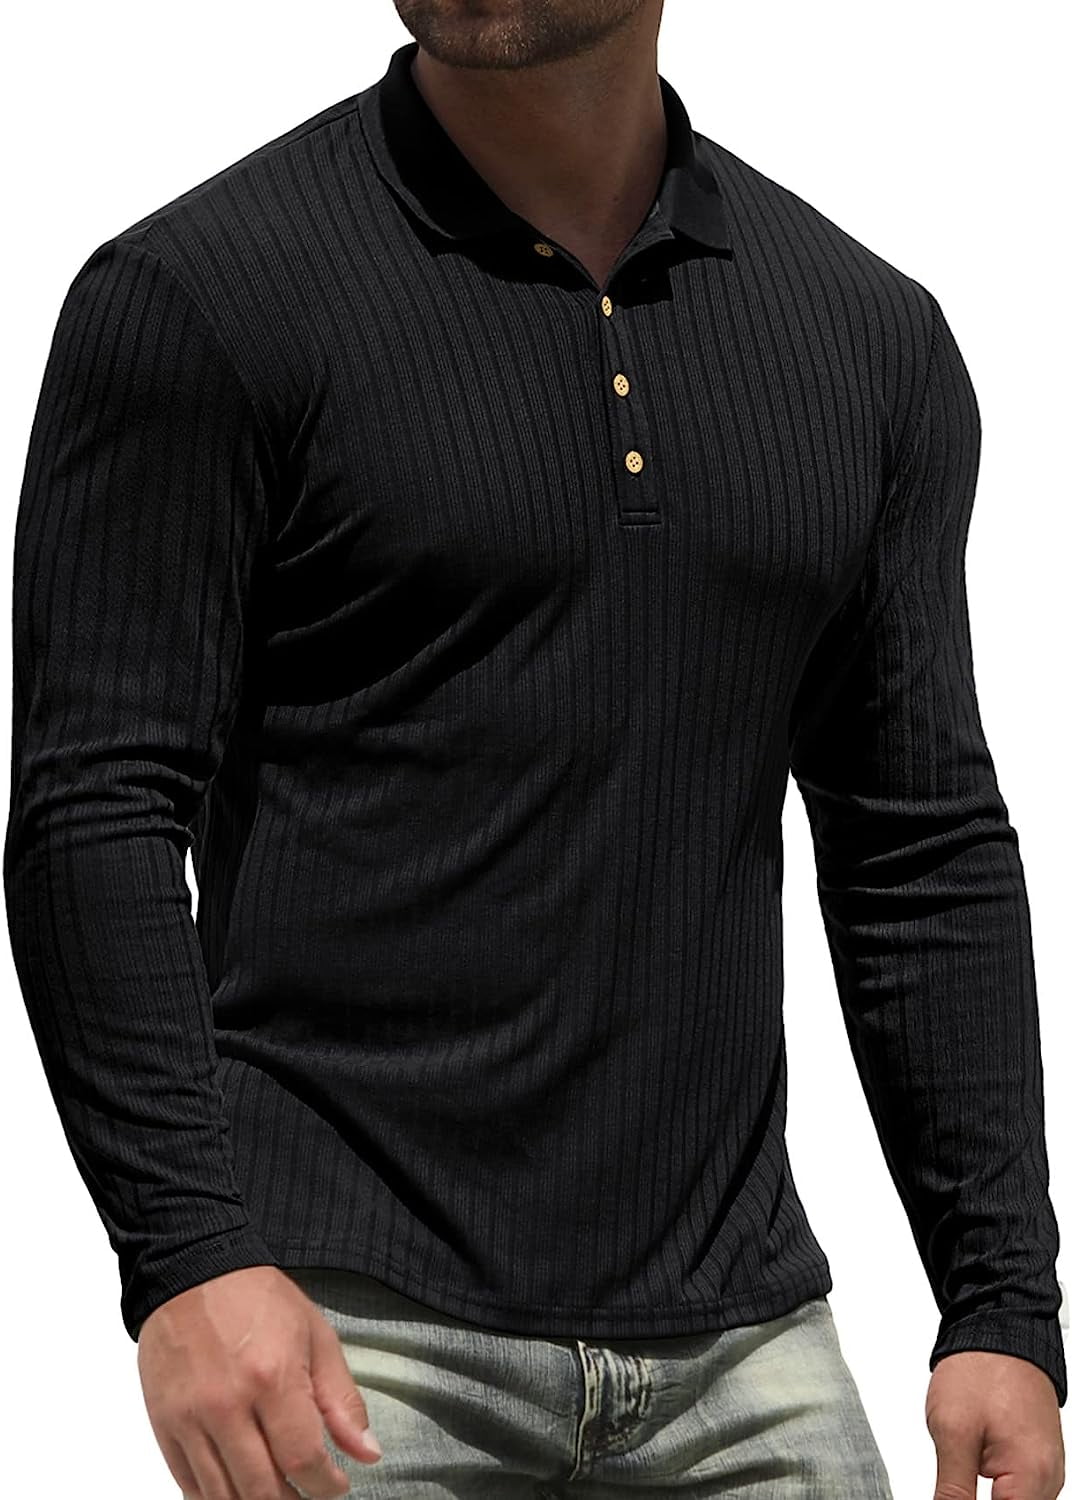 Iceglad Men's Polo Shirts long Sleeve Casual Slim Fit Workout Shirts ...